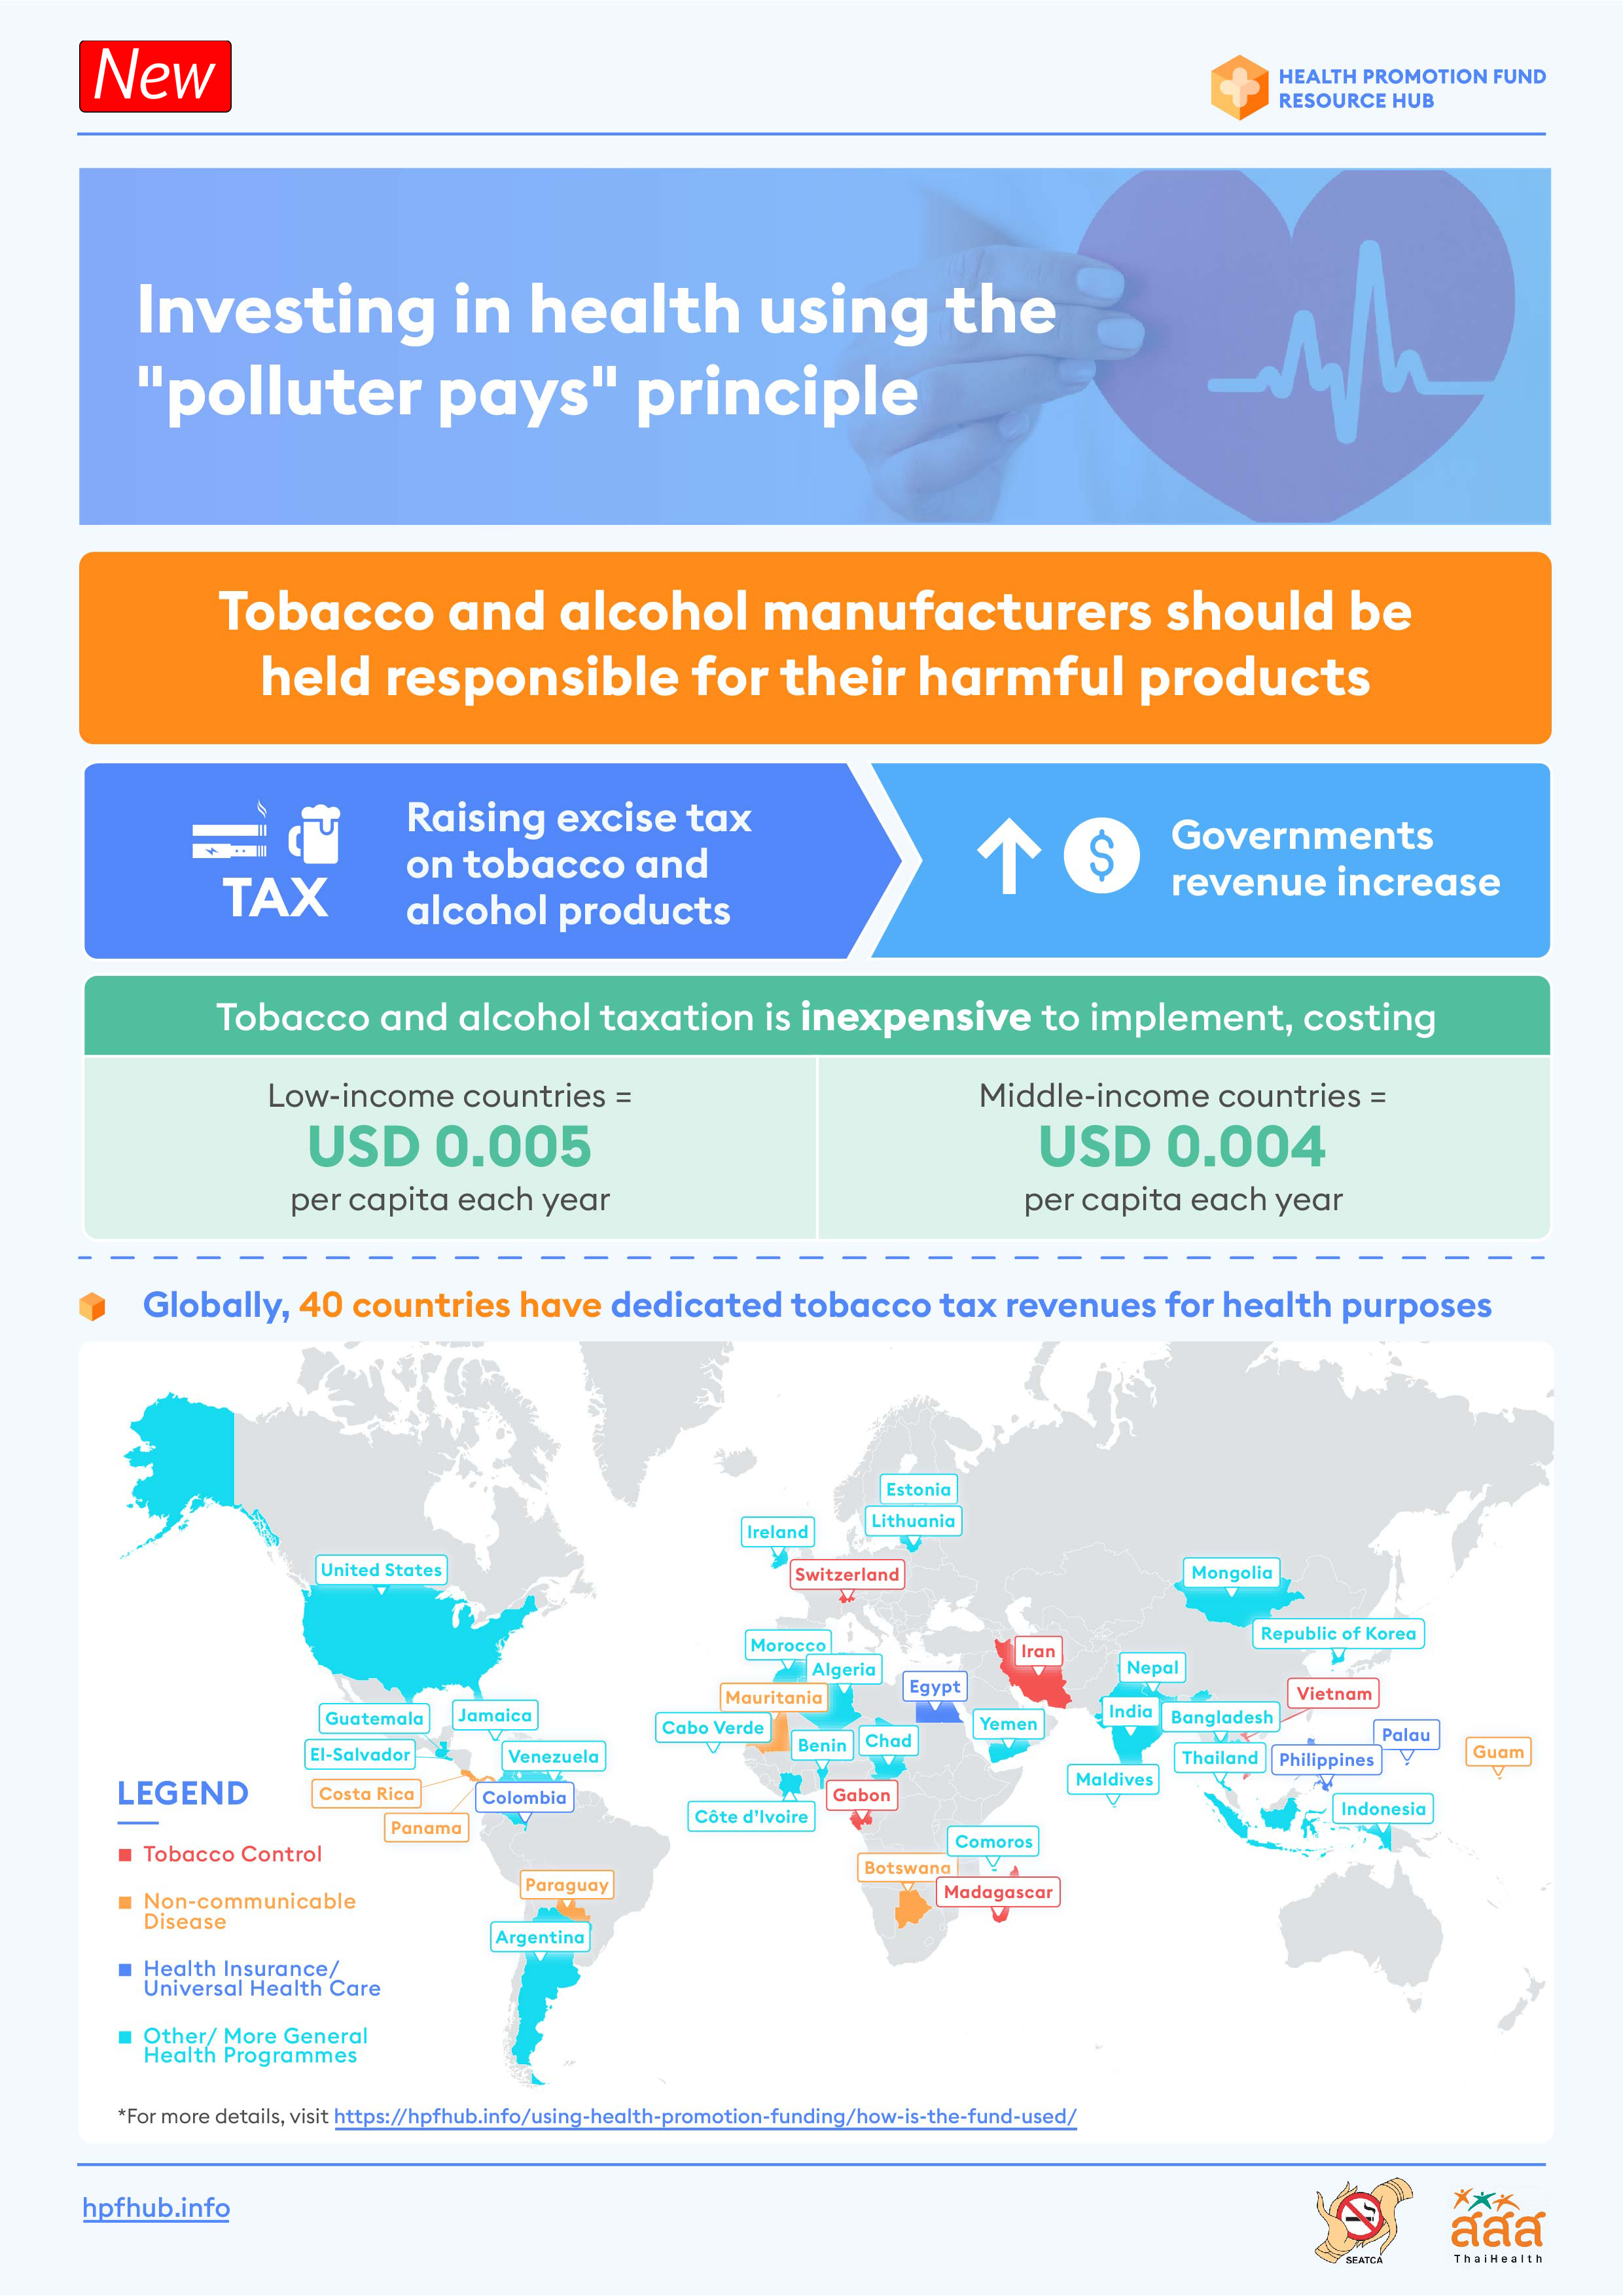 Investing in health using the “polluter pays” principle